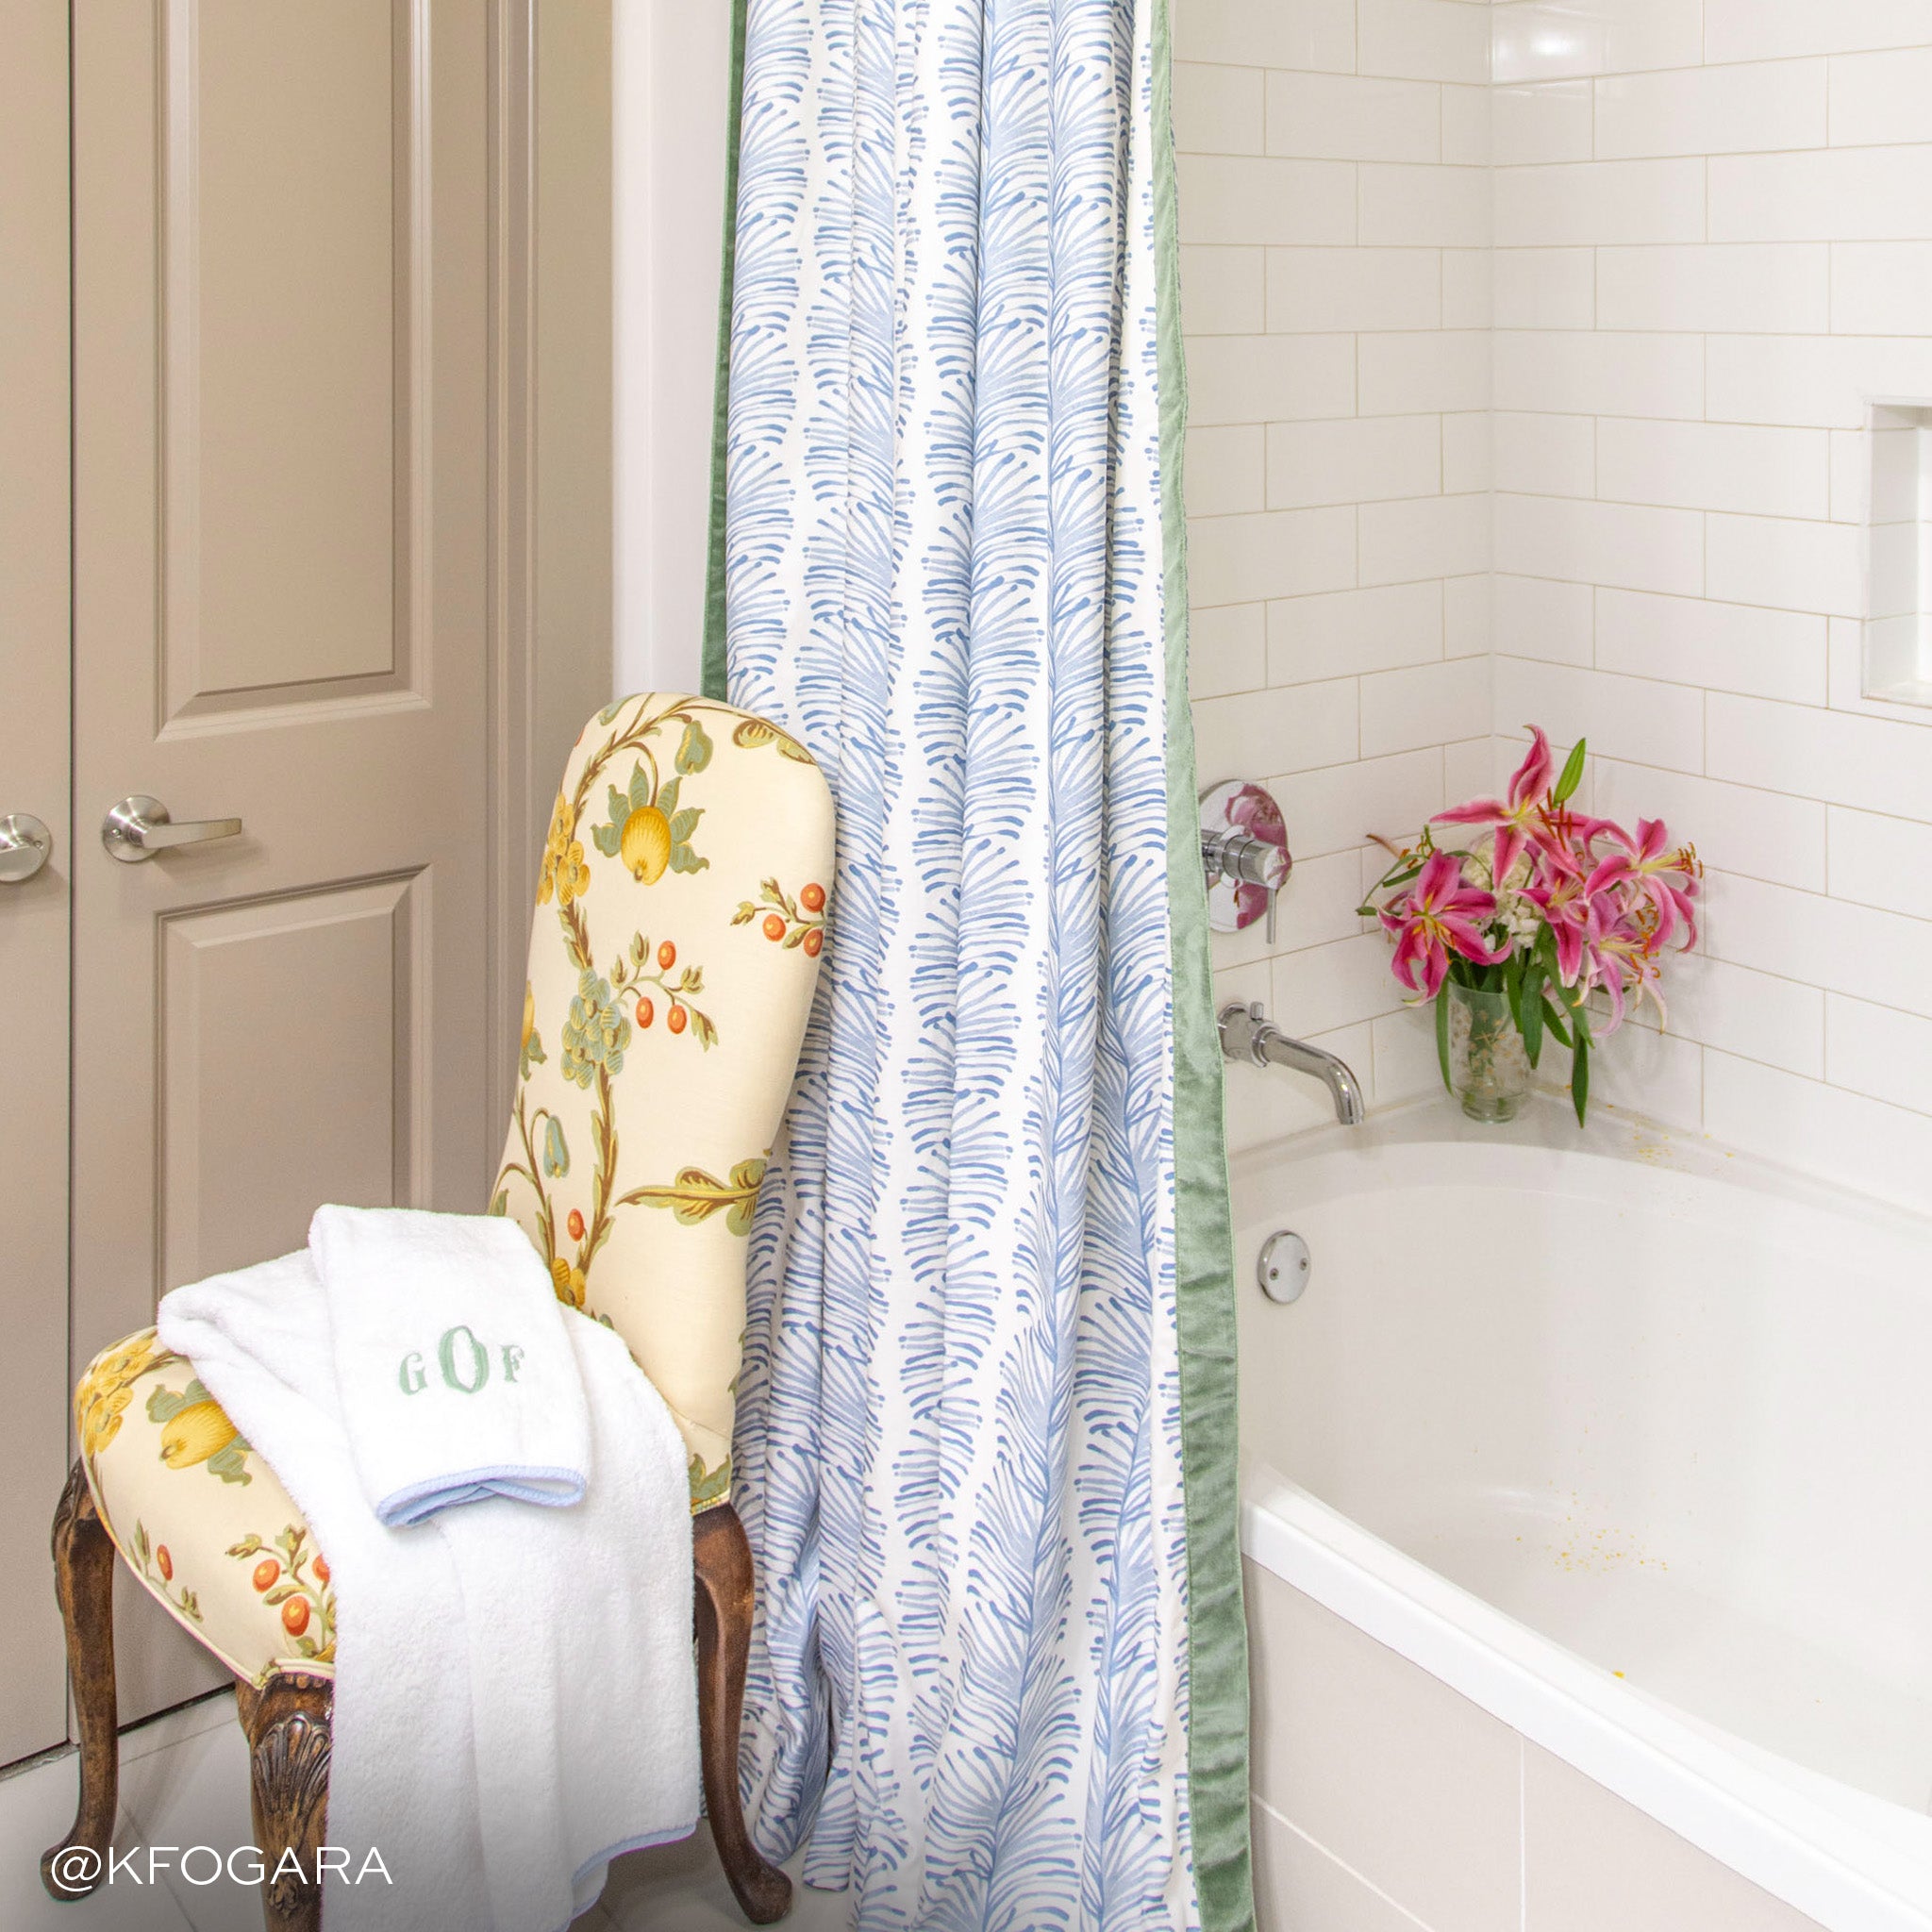 sky blue botanical stripe patterned shower curtain with a white tiled bathtub with flowers inside of the tub and a floral chair in front of the tub